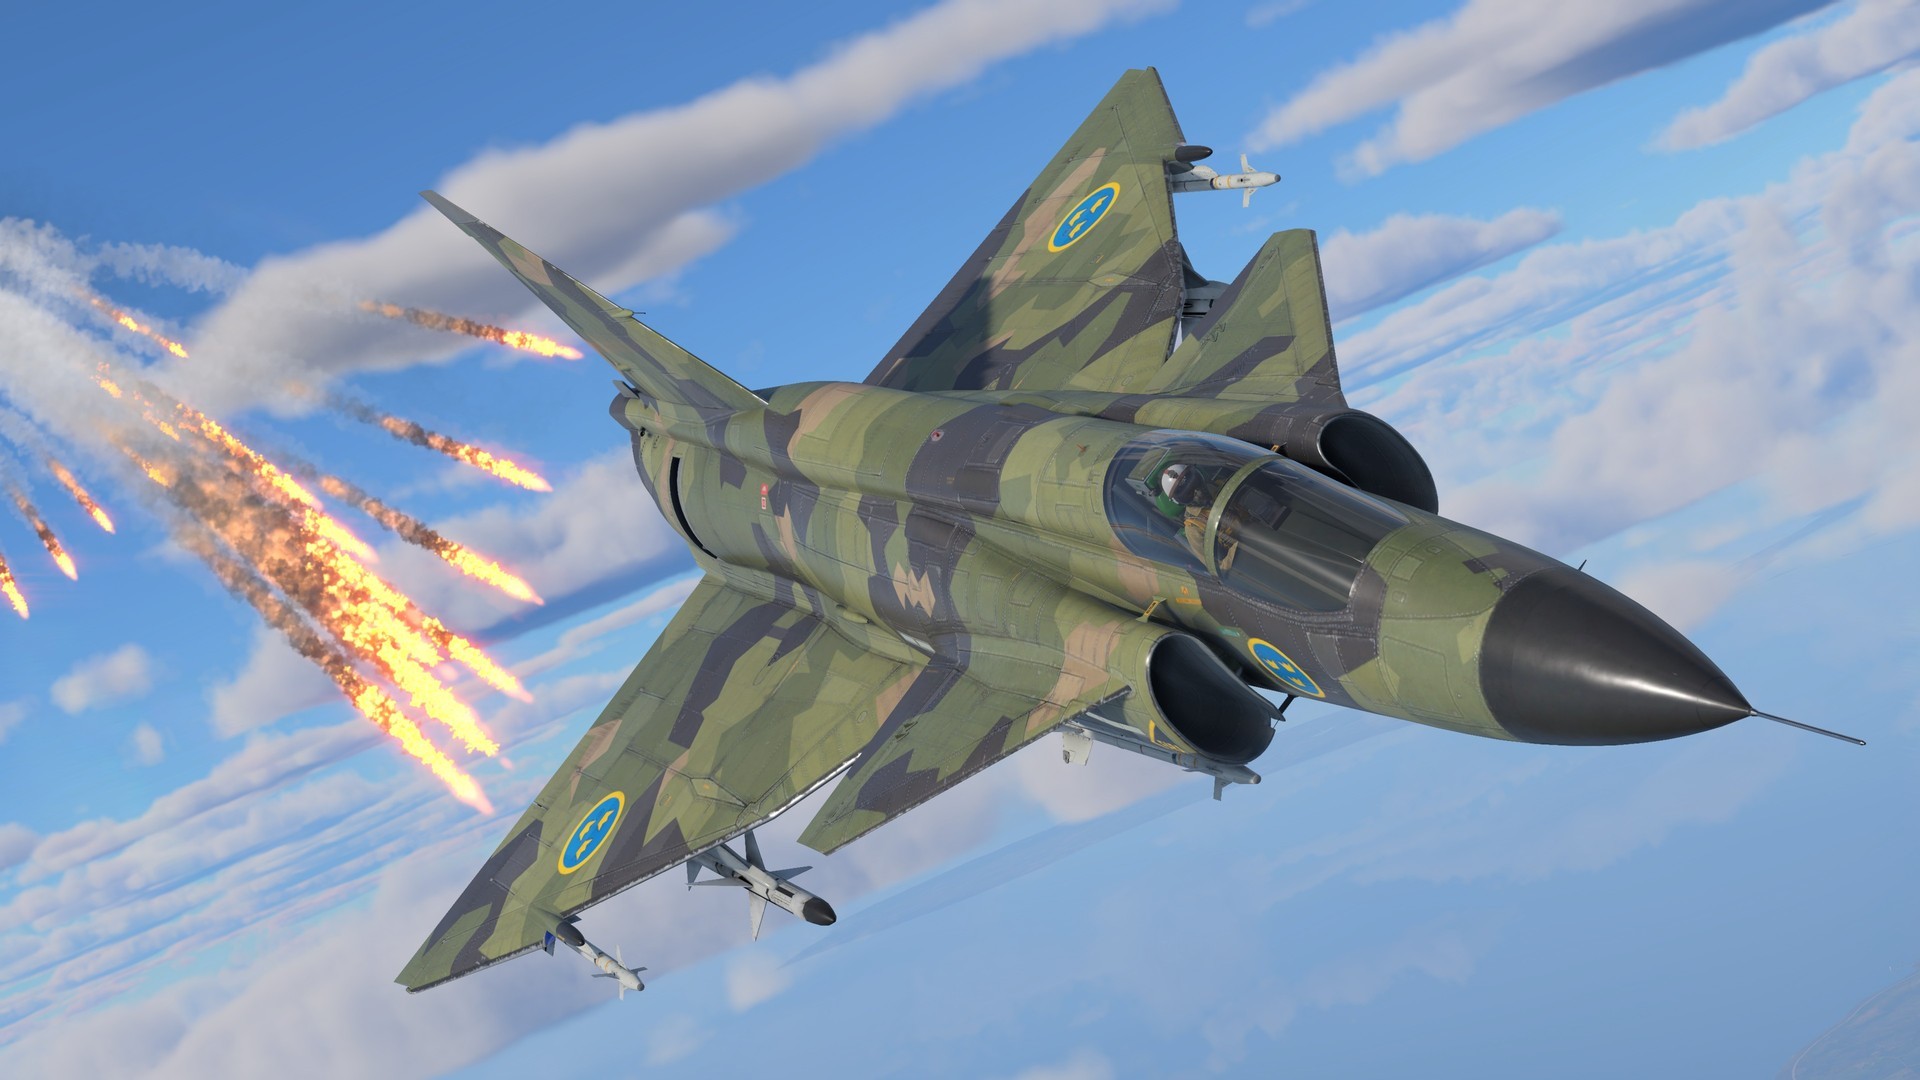 A Swedish fighter jet in War Thunder.